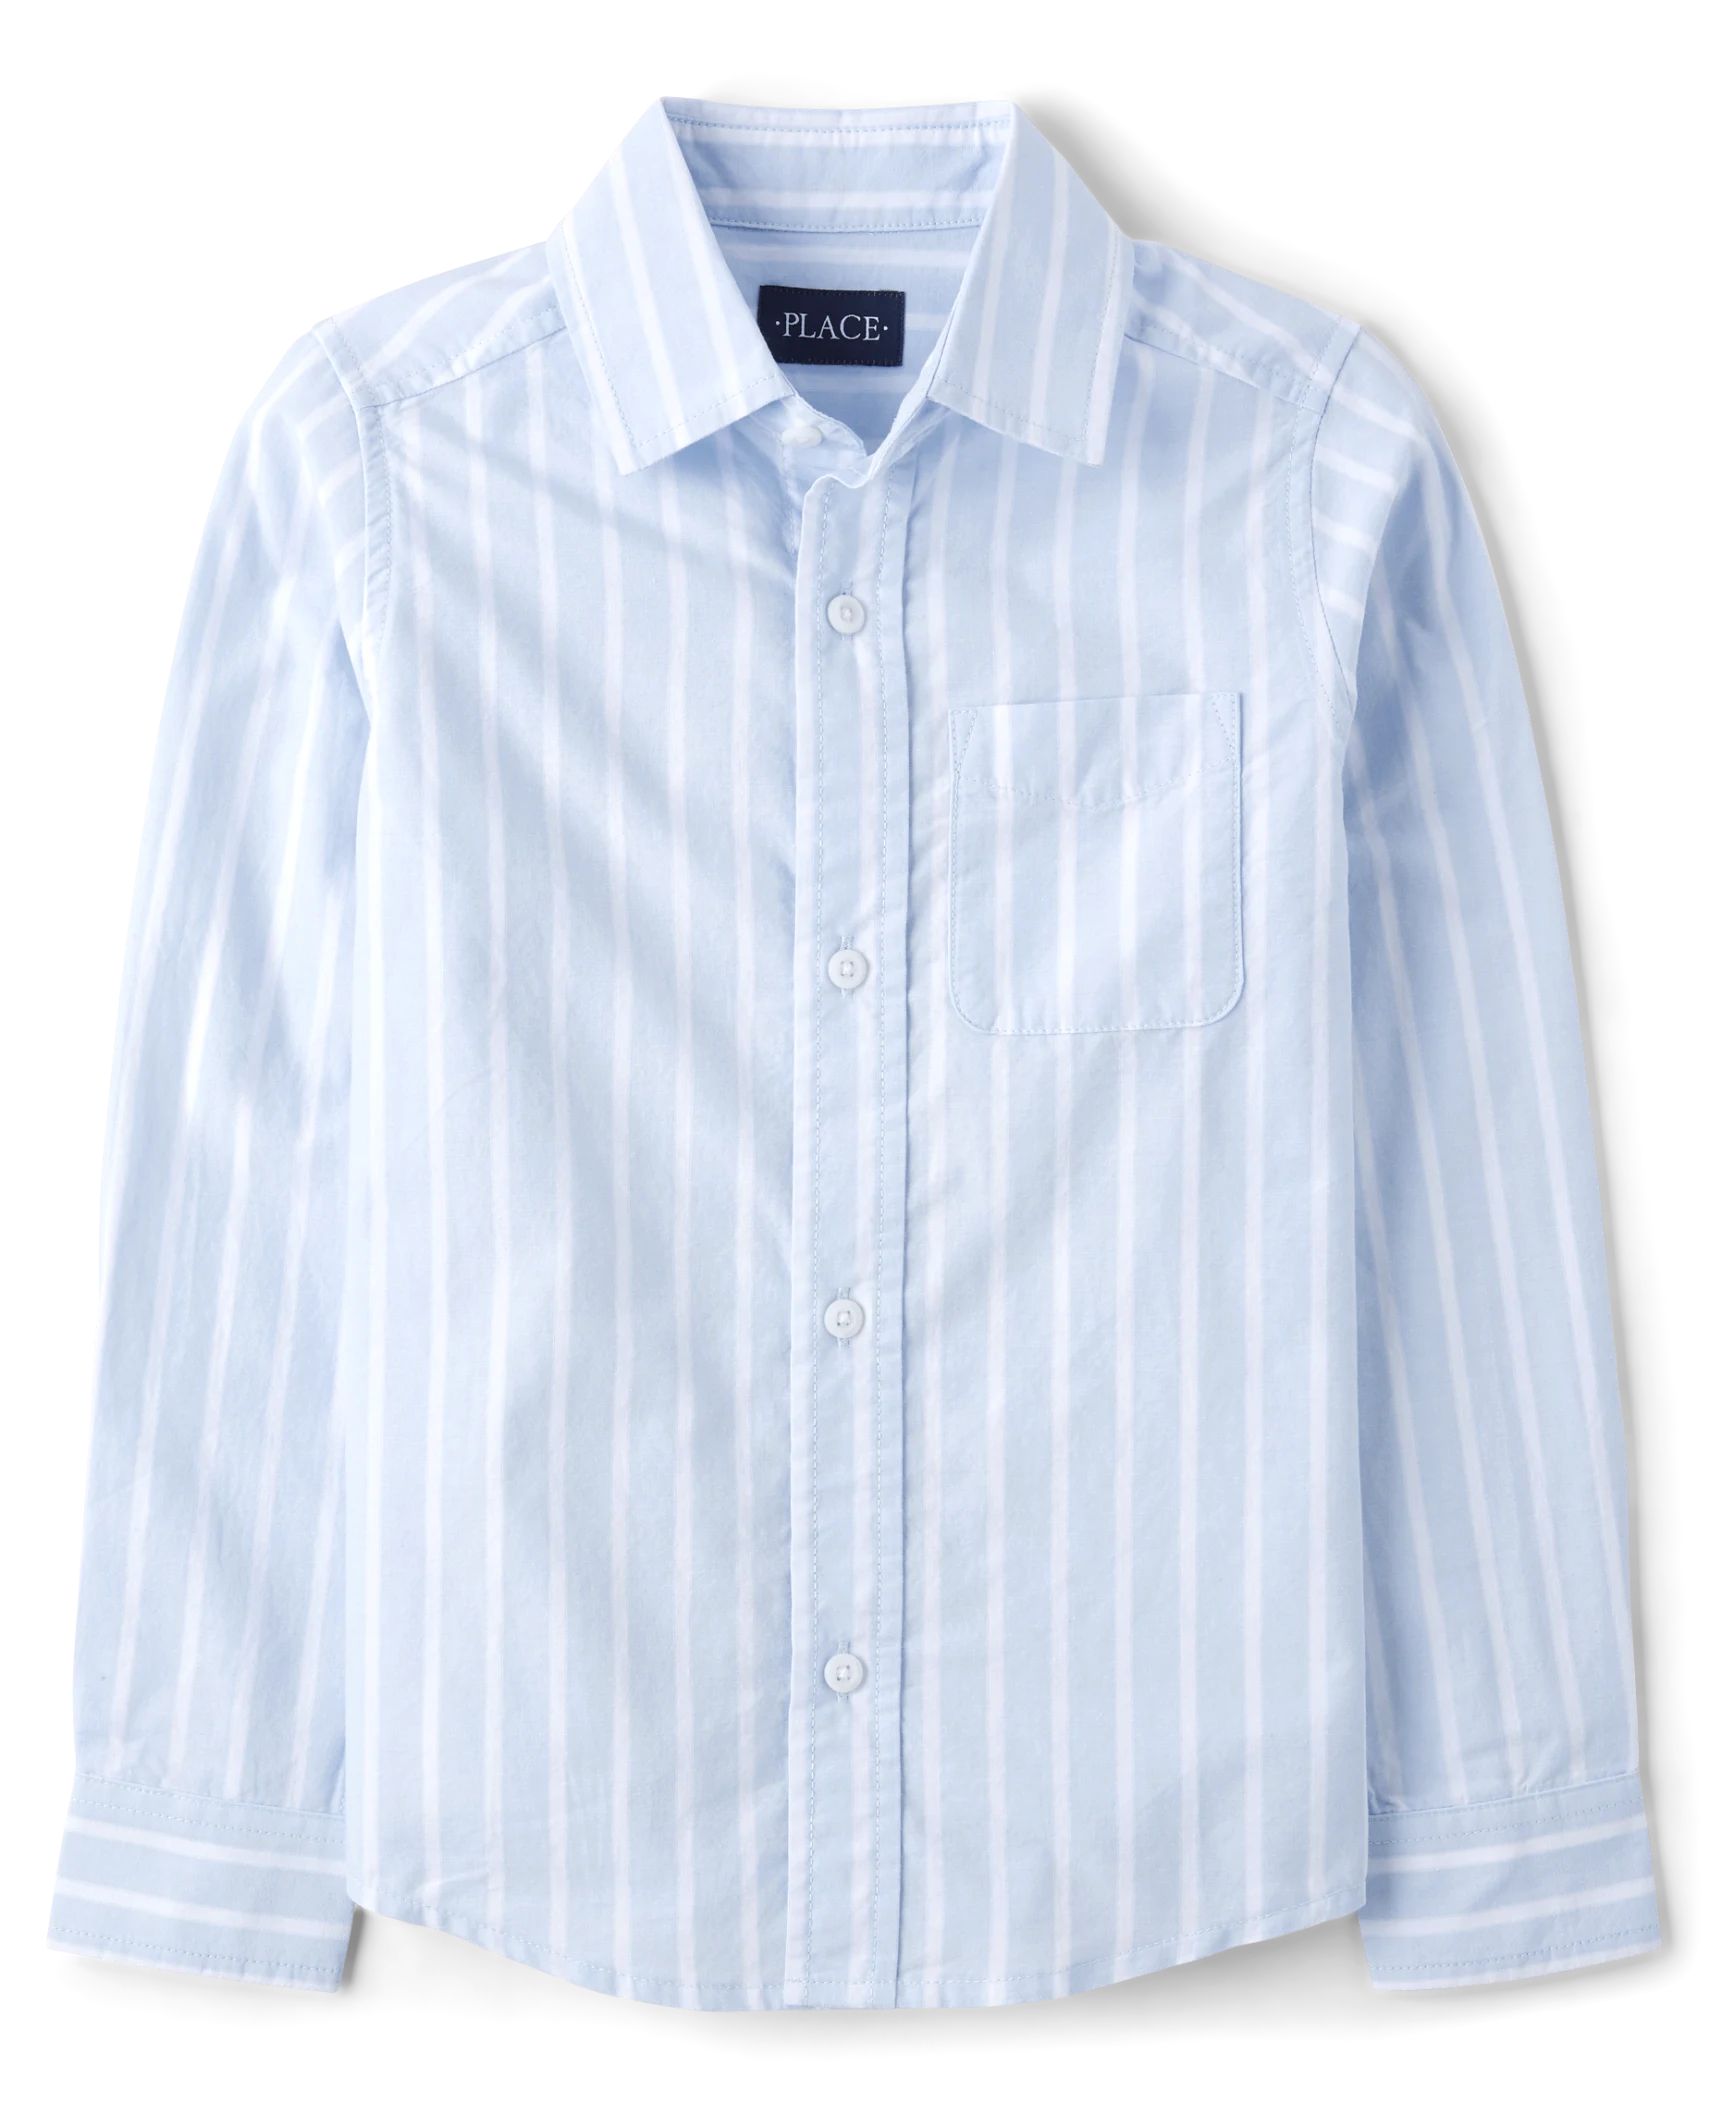 Boys Long Sleeve Striped Poplin Button Up Shirt | The Children's Place  - WHIRLWIND | The Children's Place